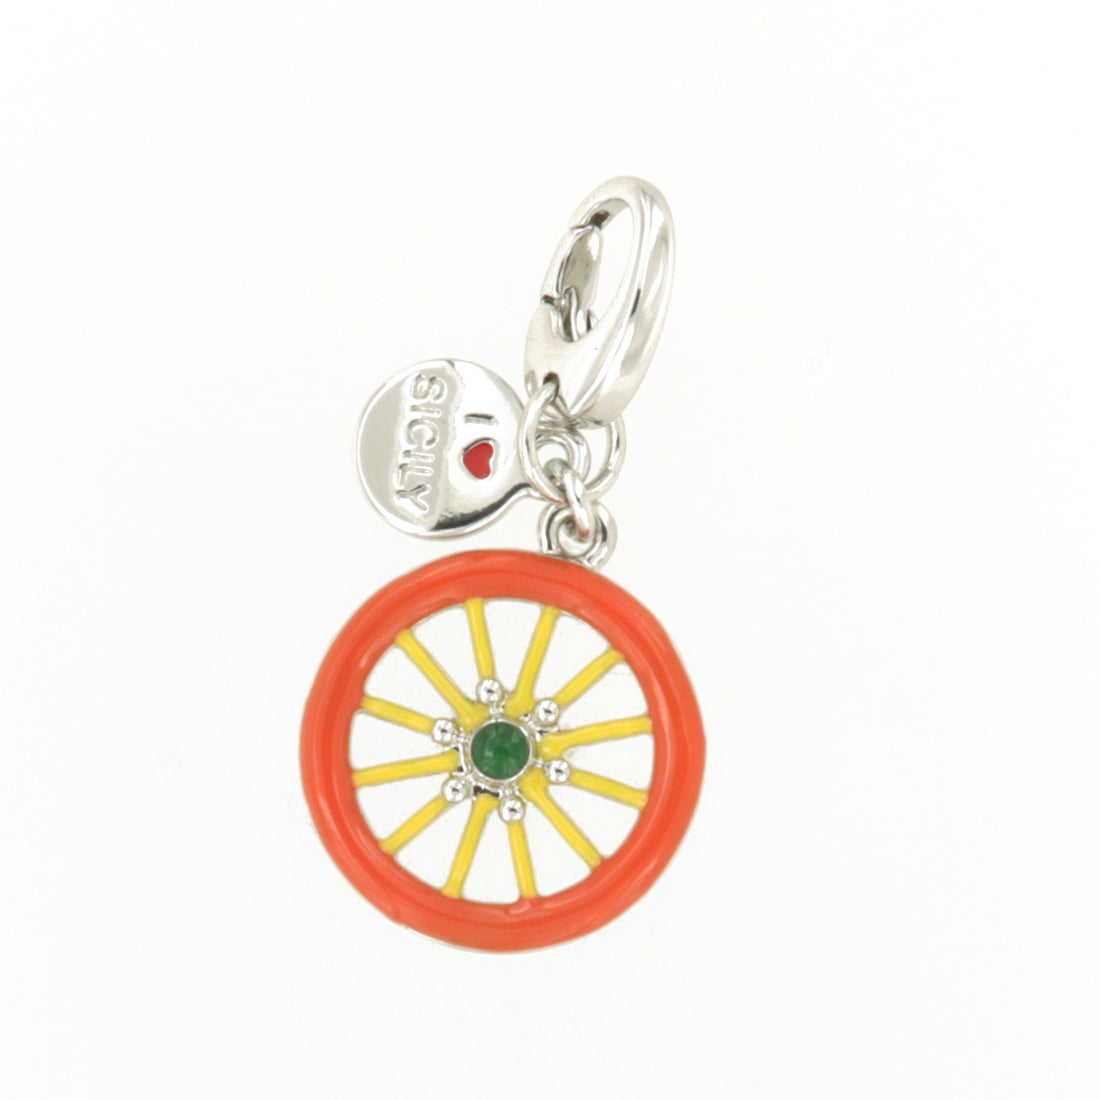 Metal pendant with a Sicilian cart wheel embellished with colored glazes